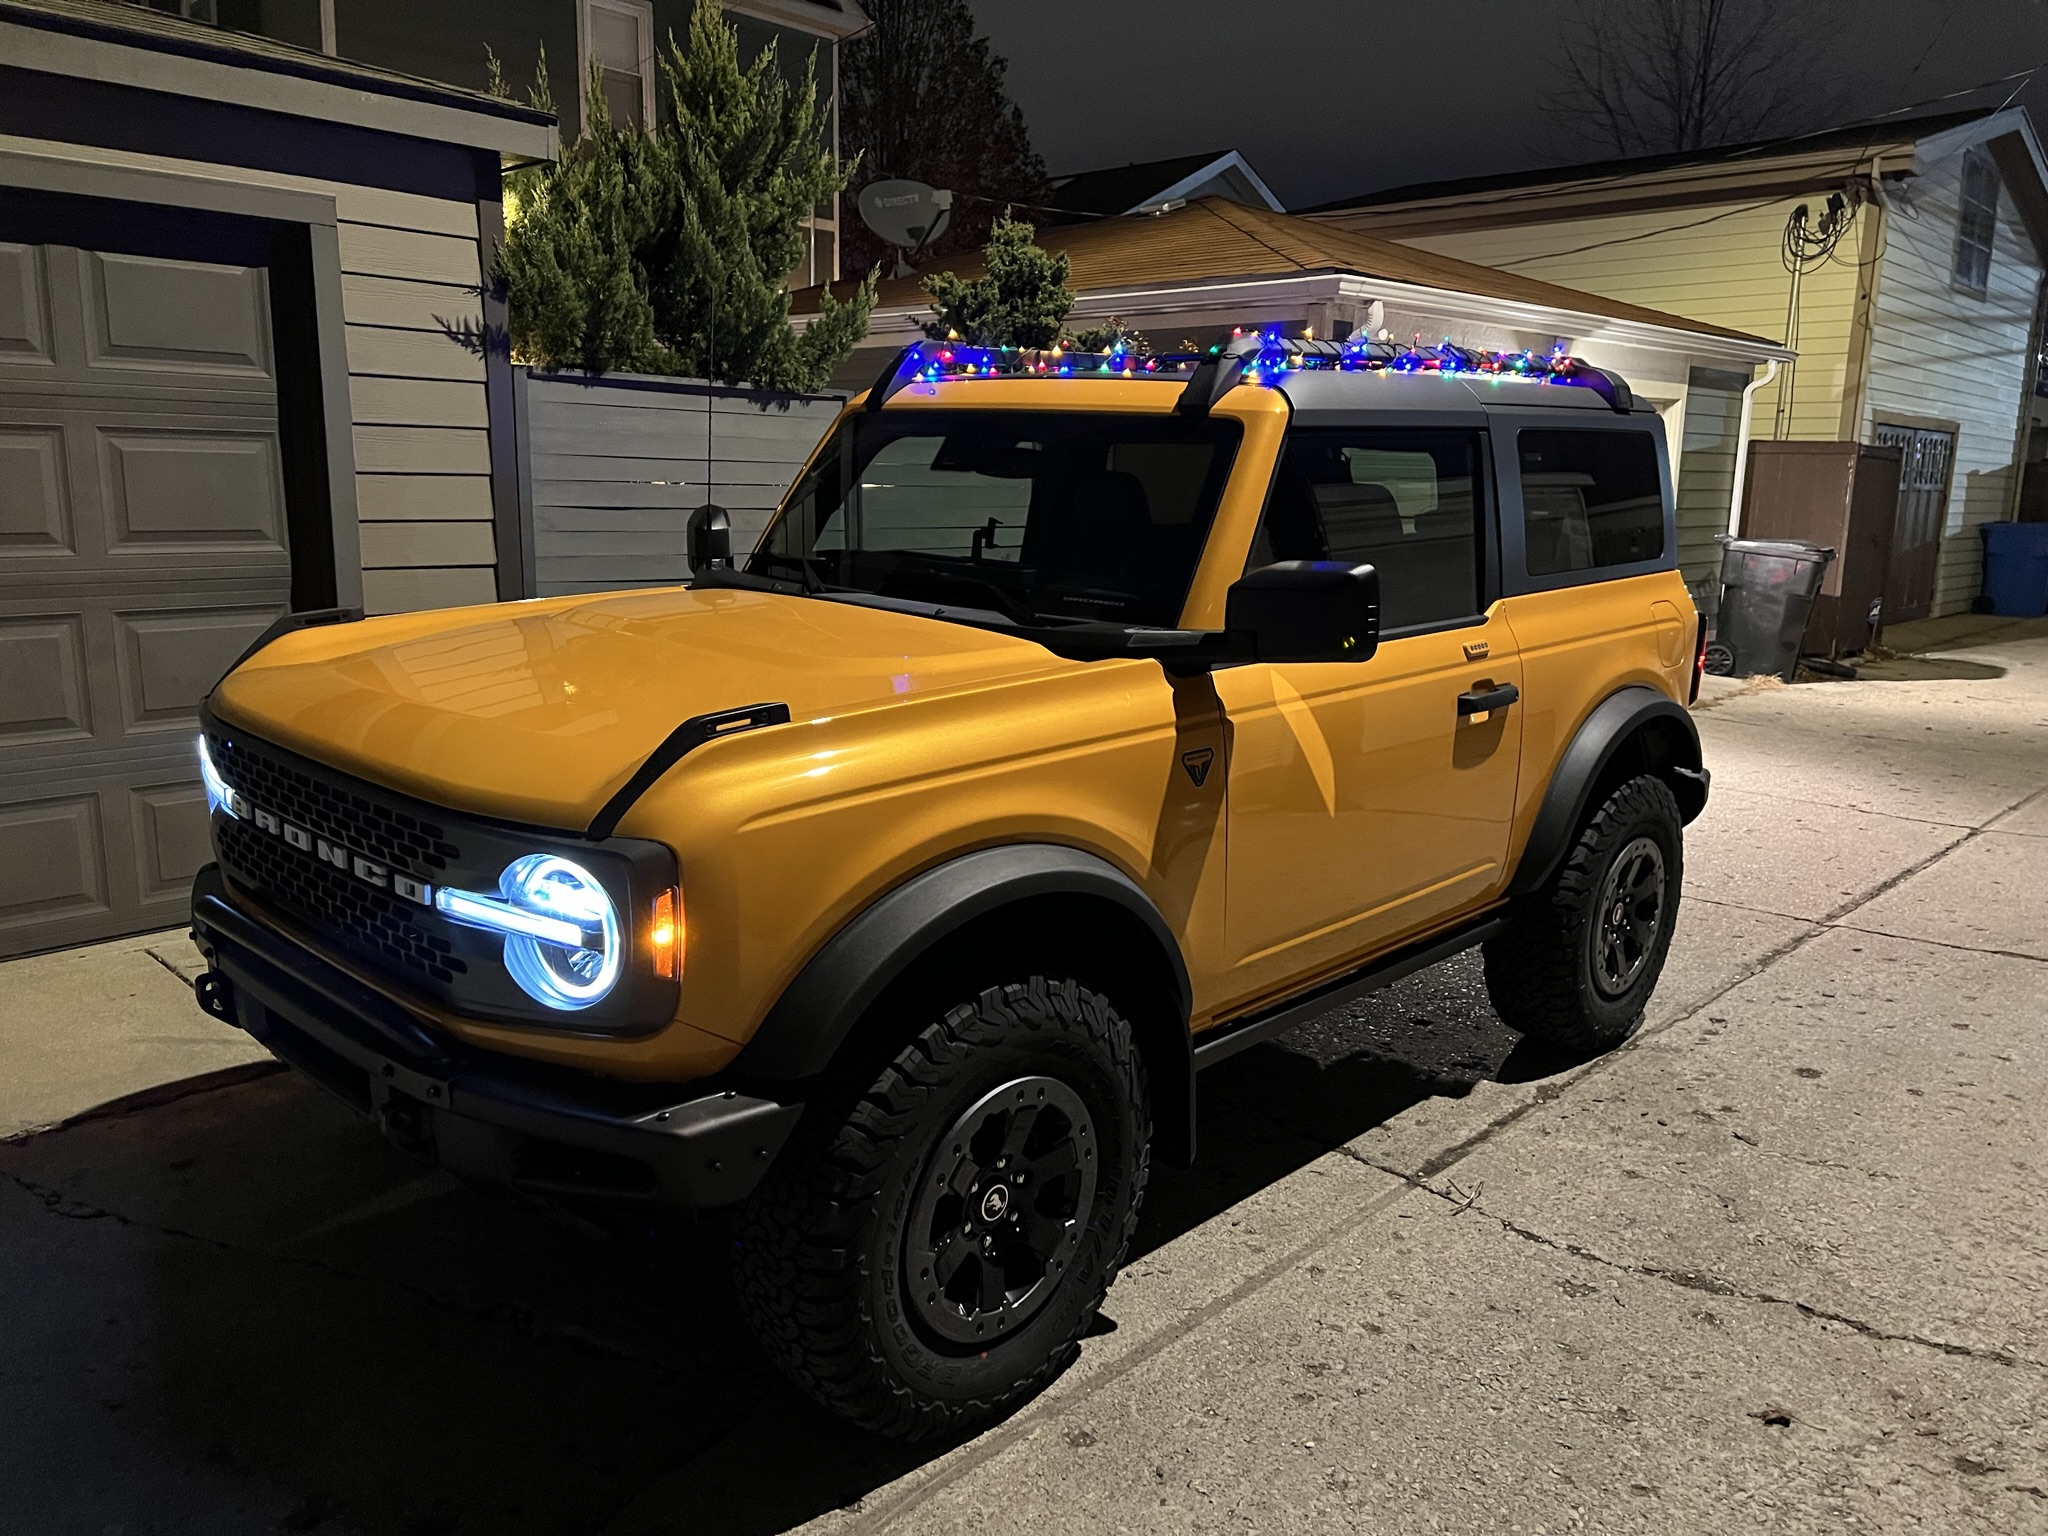 Ford Bronco How are you decorating your Bronco for Christmas or holidays? Post yours! 🎅 IMG_4754